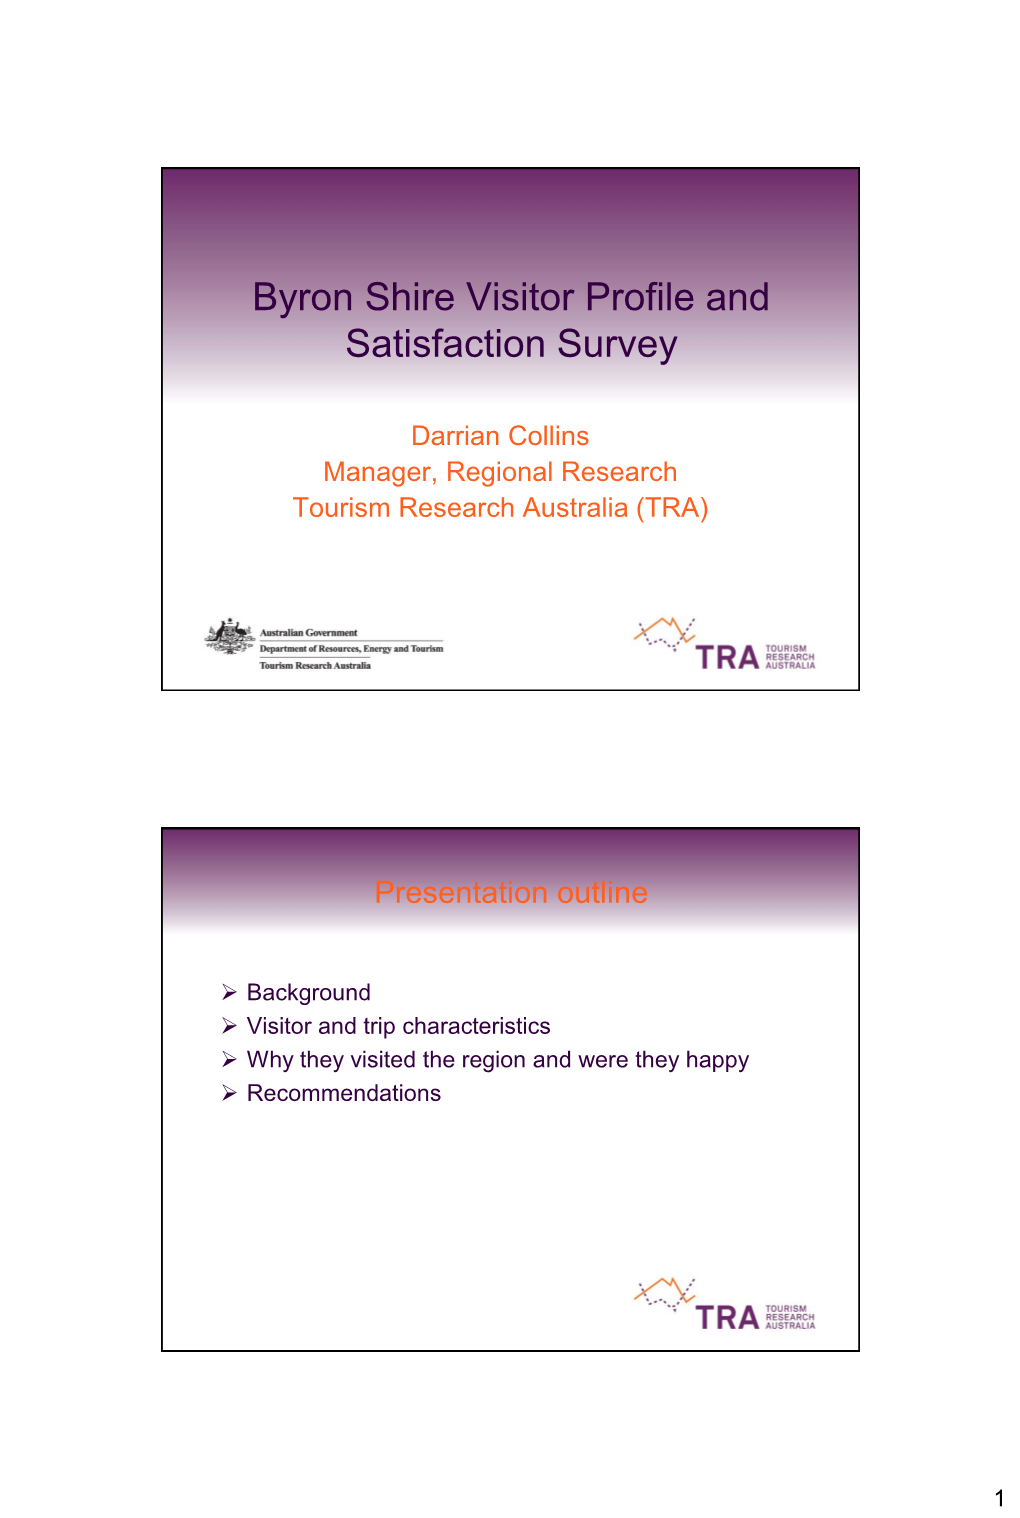 Byron Shire Visitor Profile and Satisfaction Survey